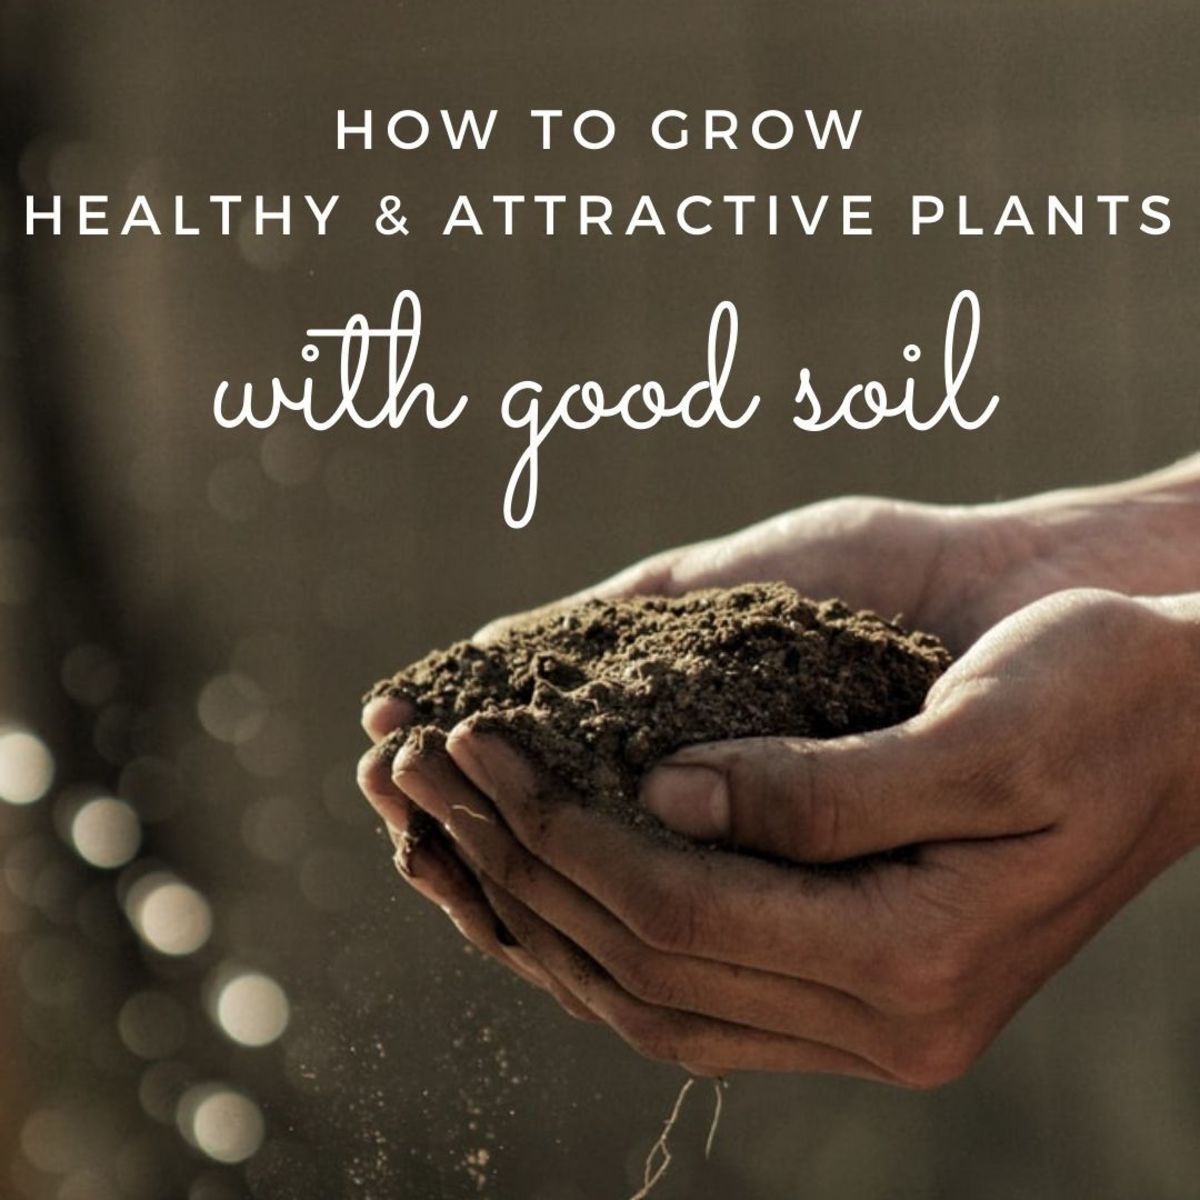 How to Prepare Your Soil for Attractive, Healthy Plants